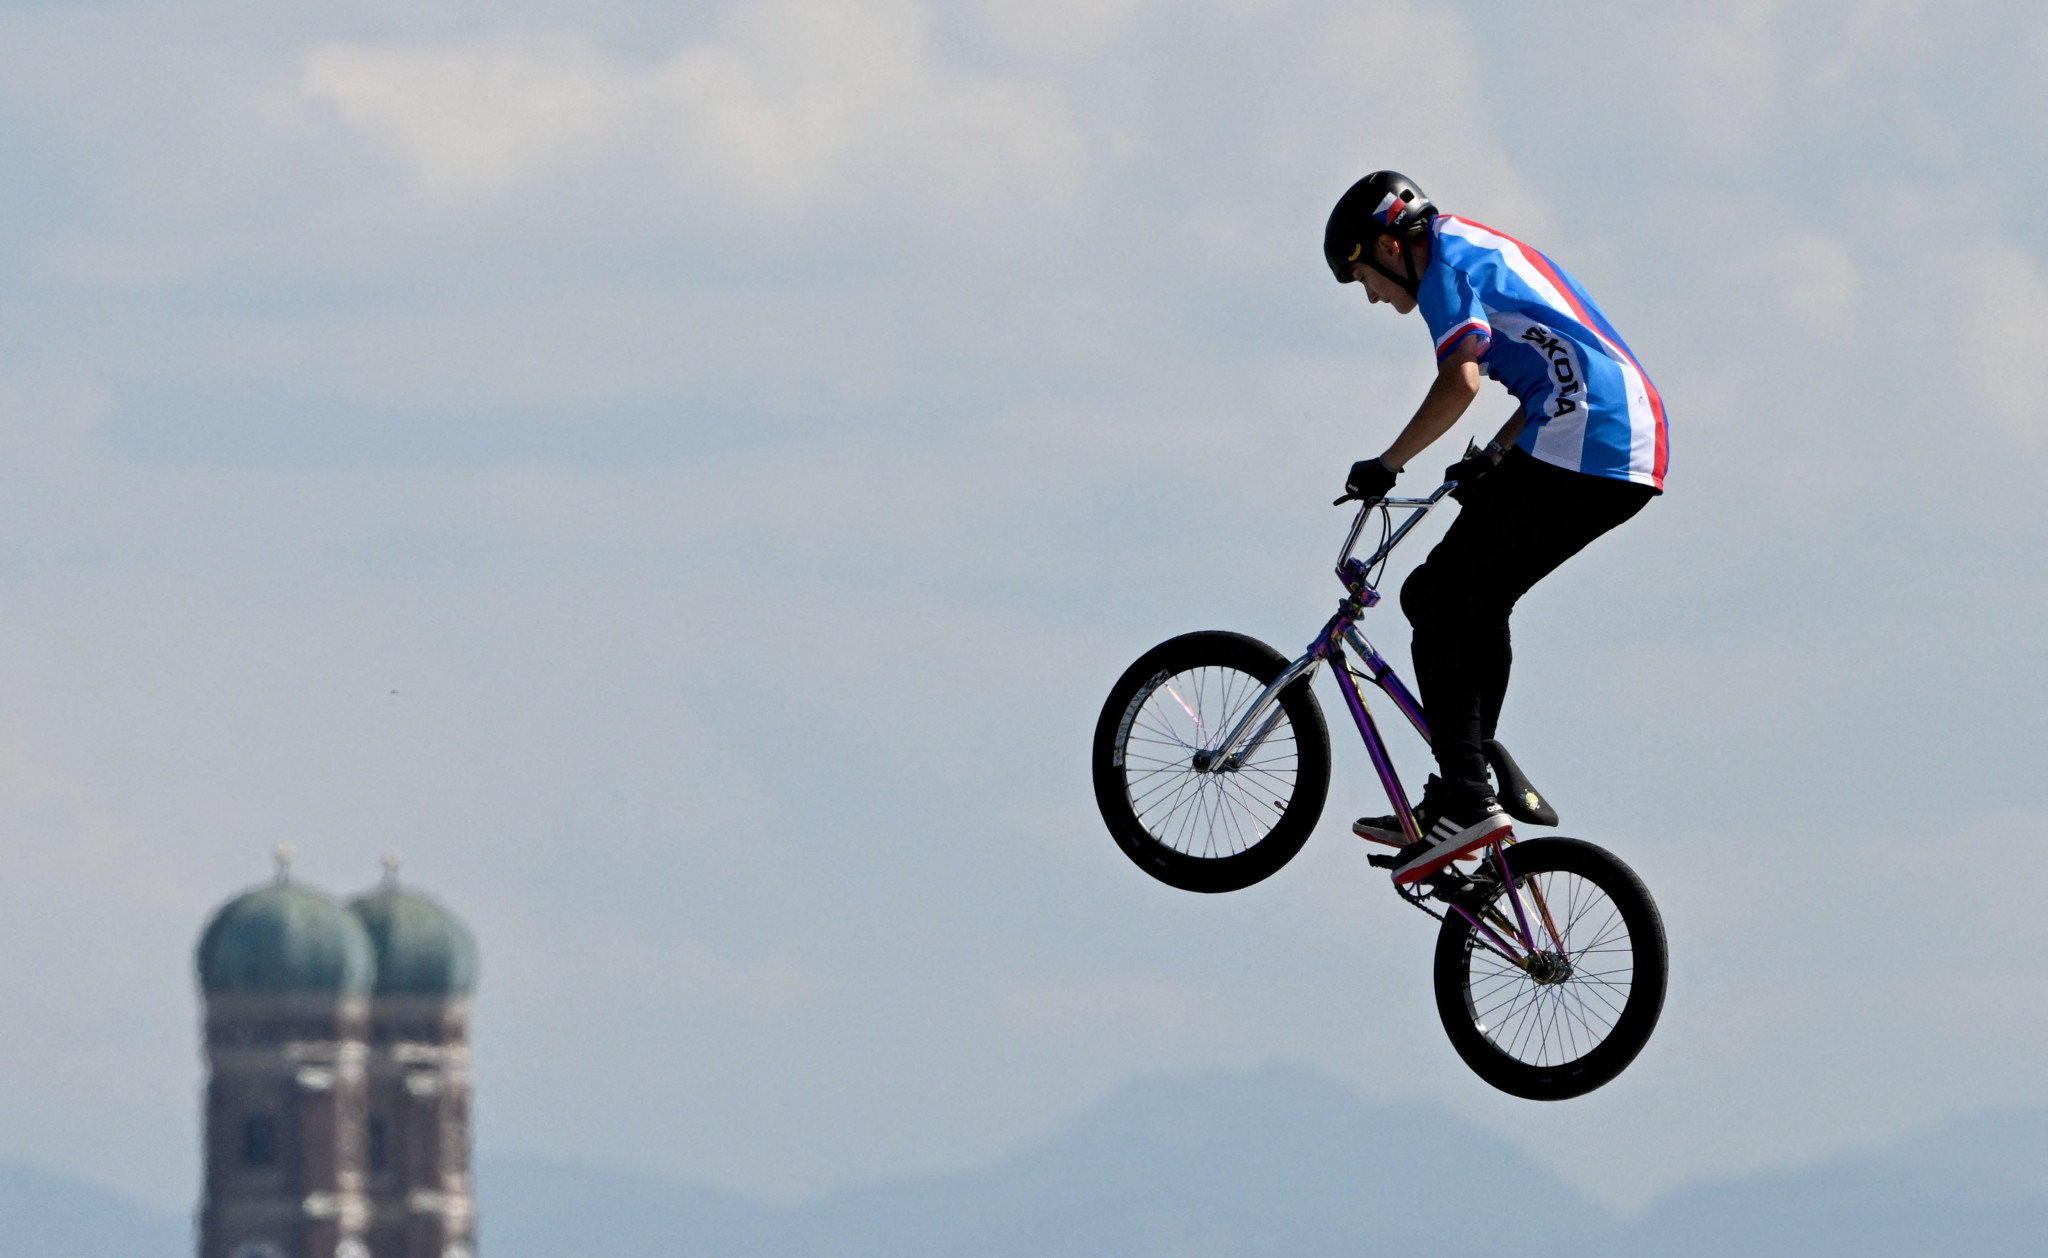 The 16-year-old Iveta Miculycova of the Czech Republic top-scored with 80 points to win gold in the women's park BMX freestyle ©Getty Images 